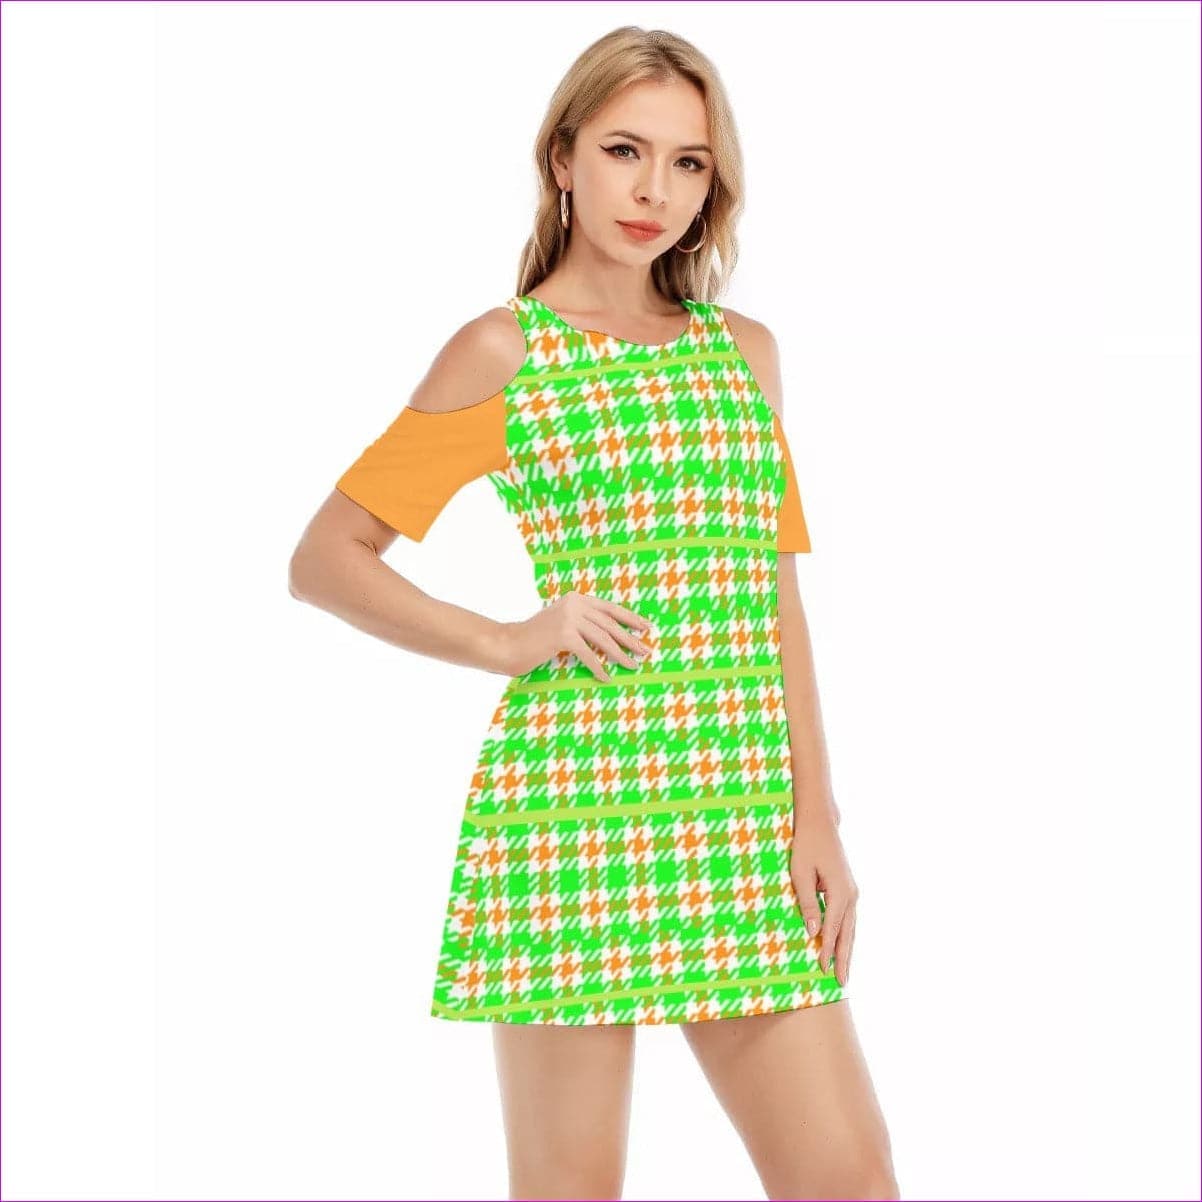 Green - Neon Houndstooth Teen's Cold Shoulder Dress | 100% Cotton - teens dress at TFC&H Co.